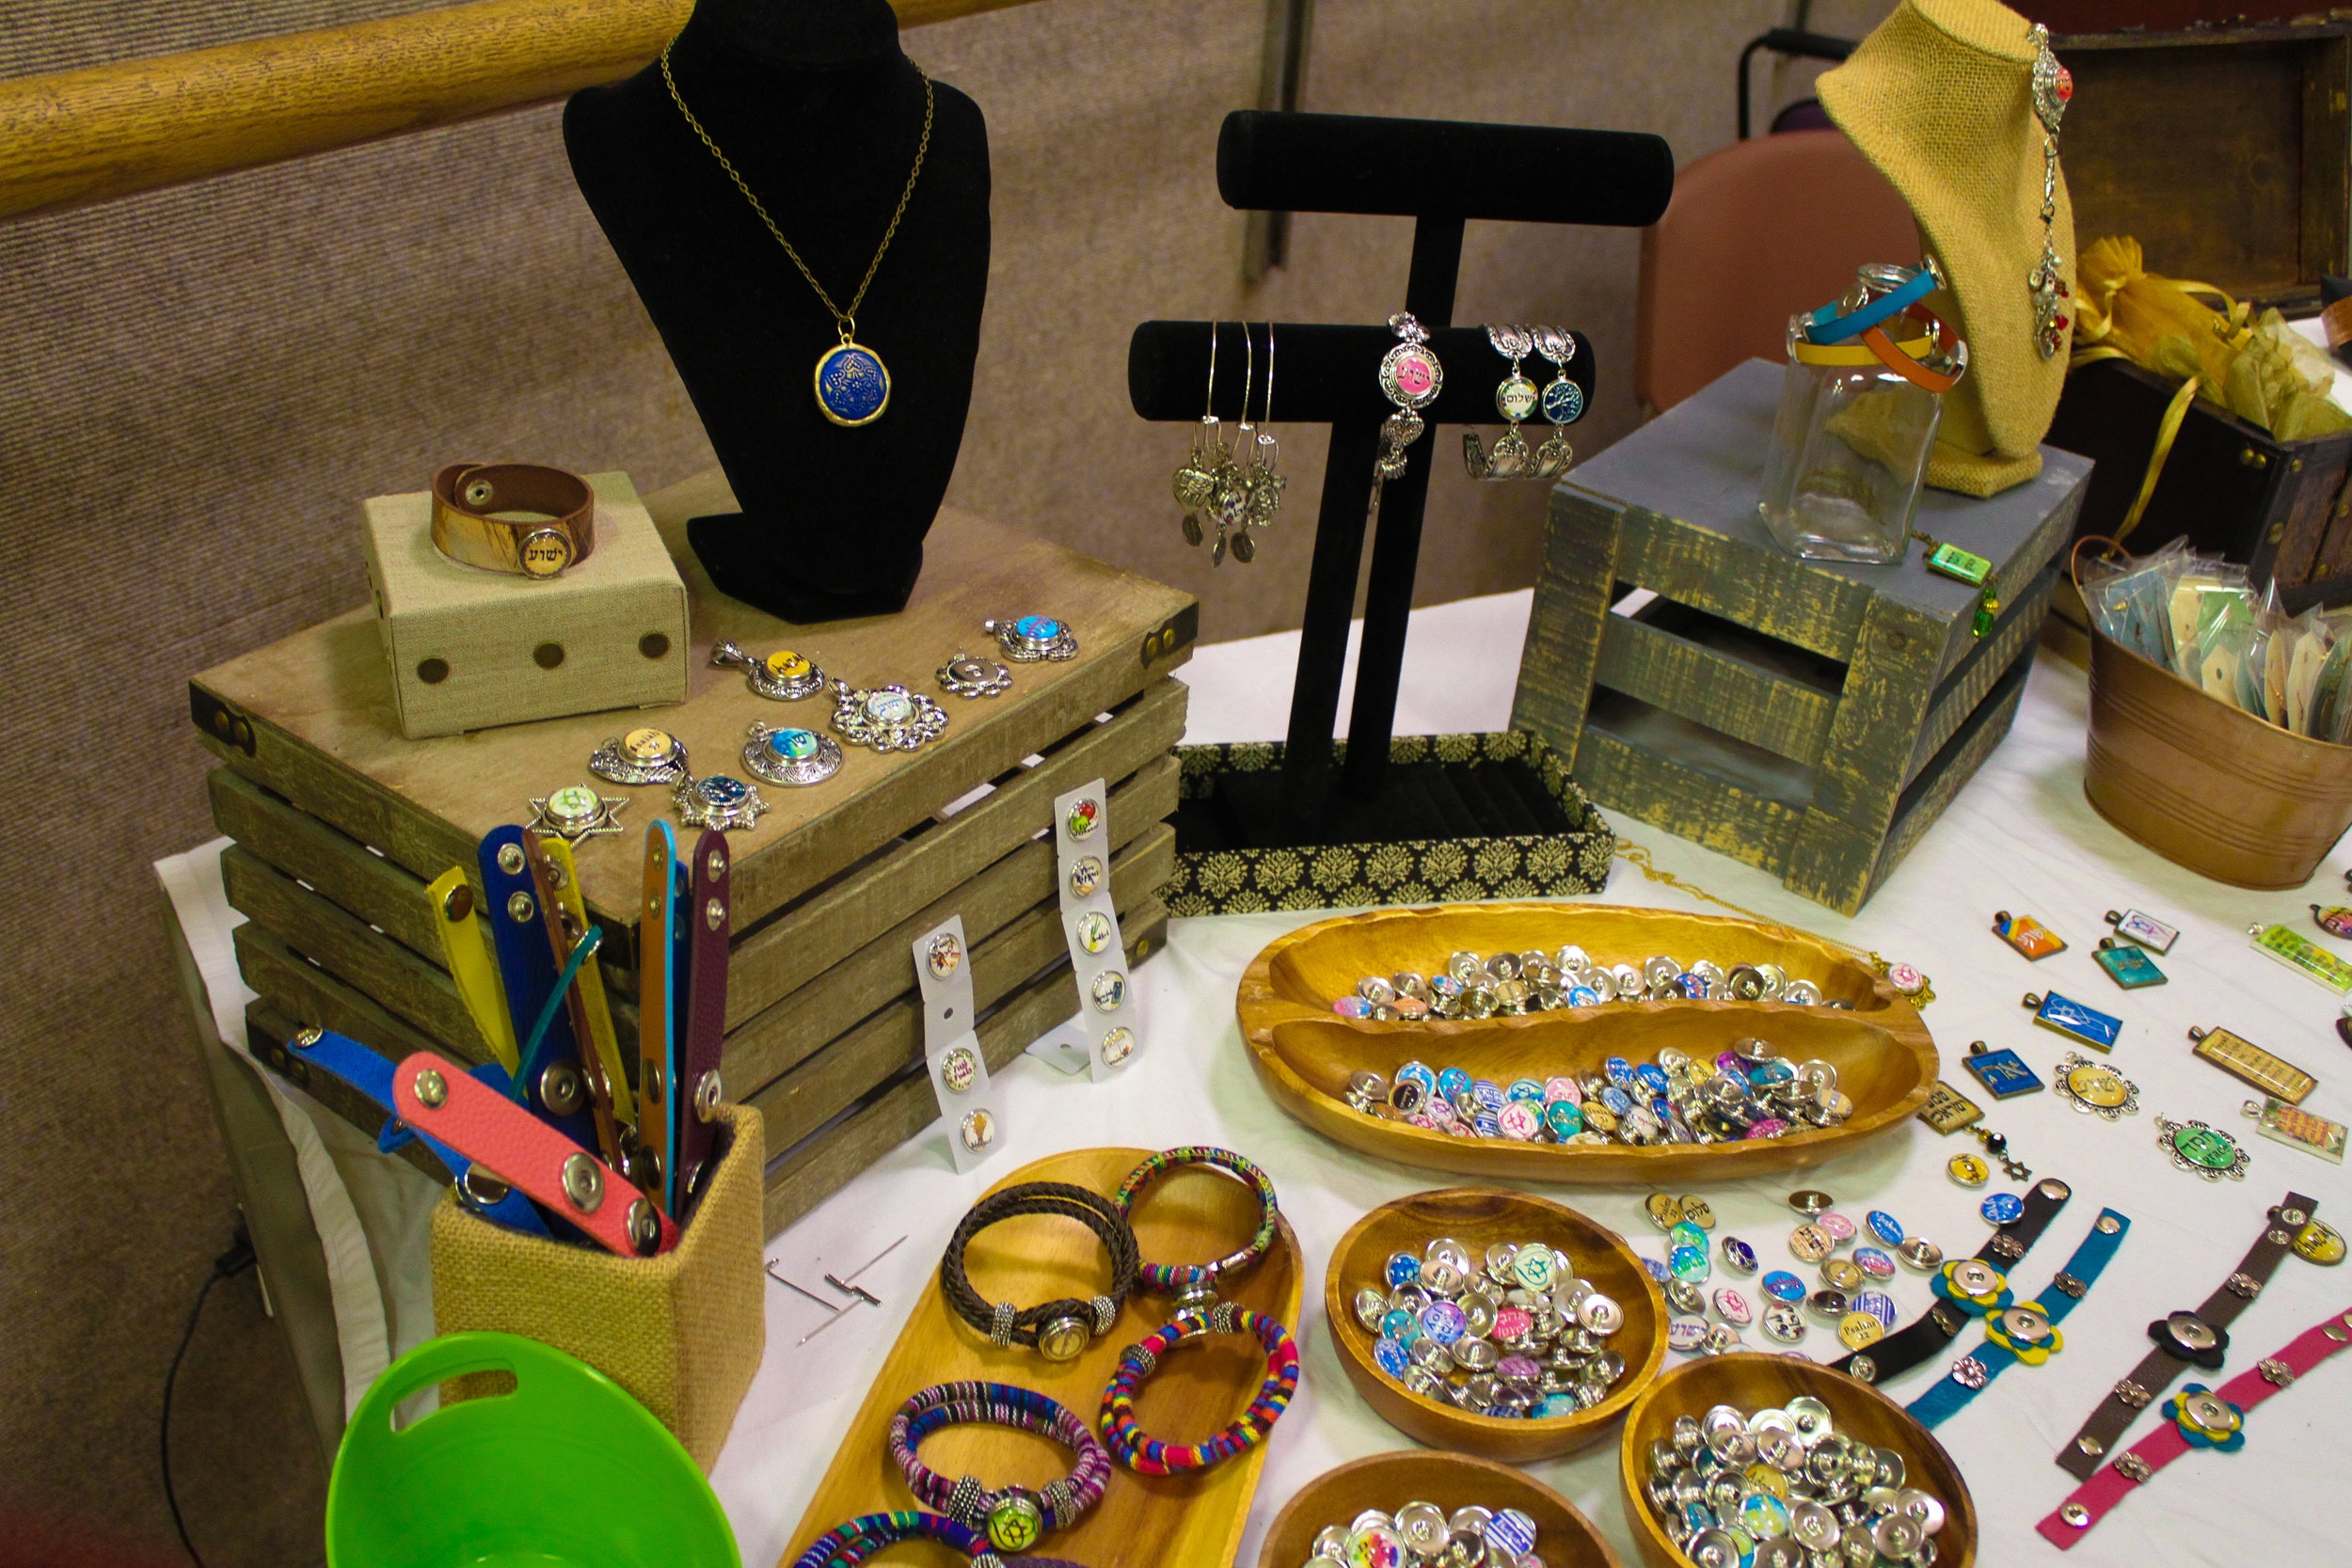 Several vendors sold jewelry.